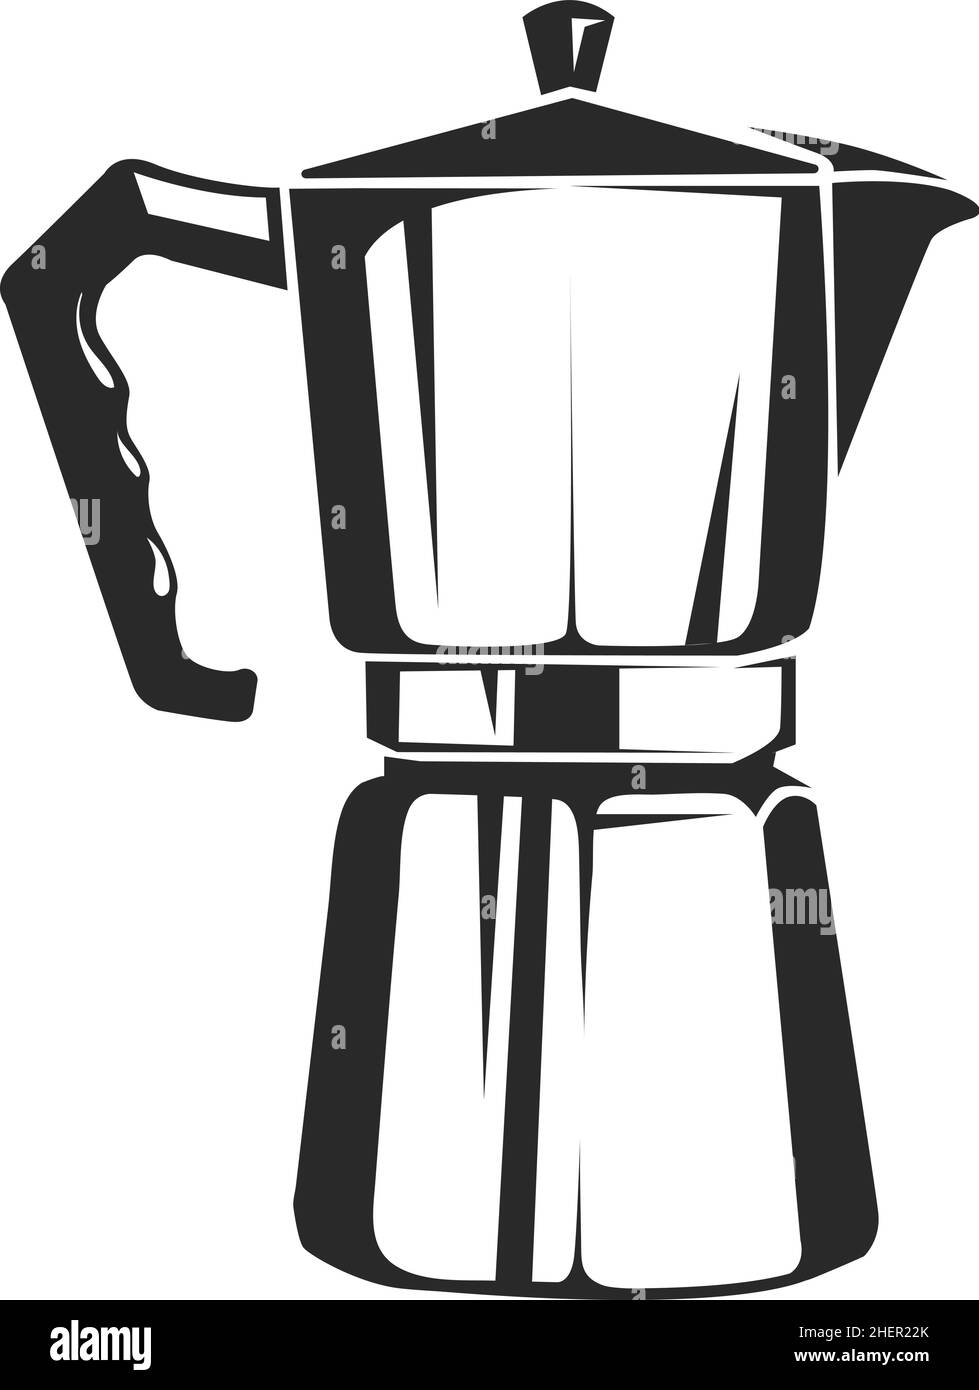 Coffee pot icon. Metal moka maker for cafe and household Stock Vector